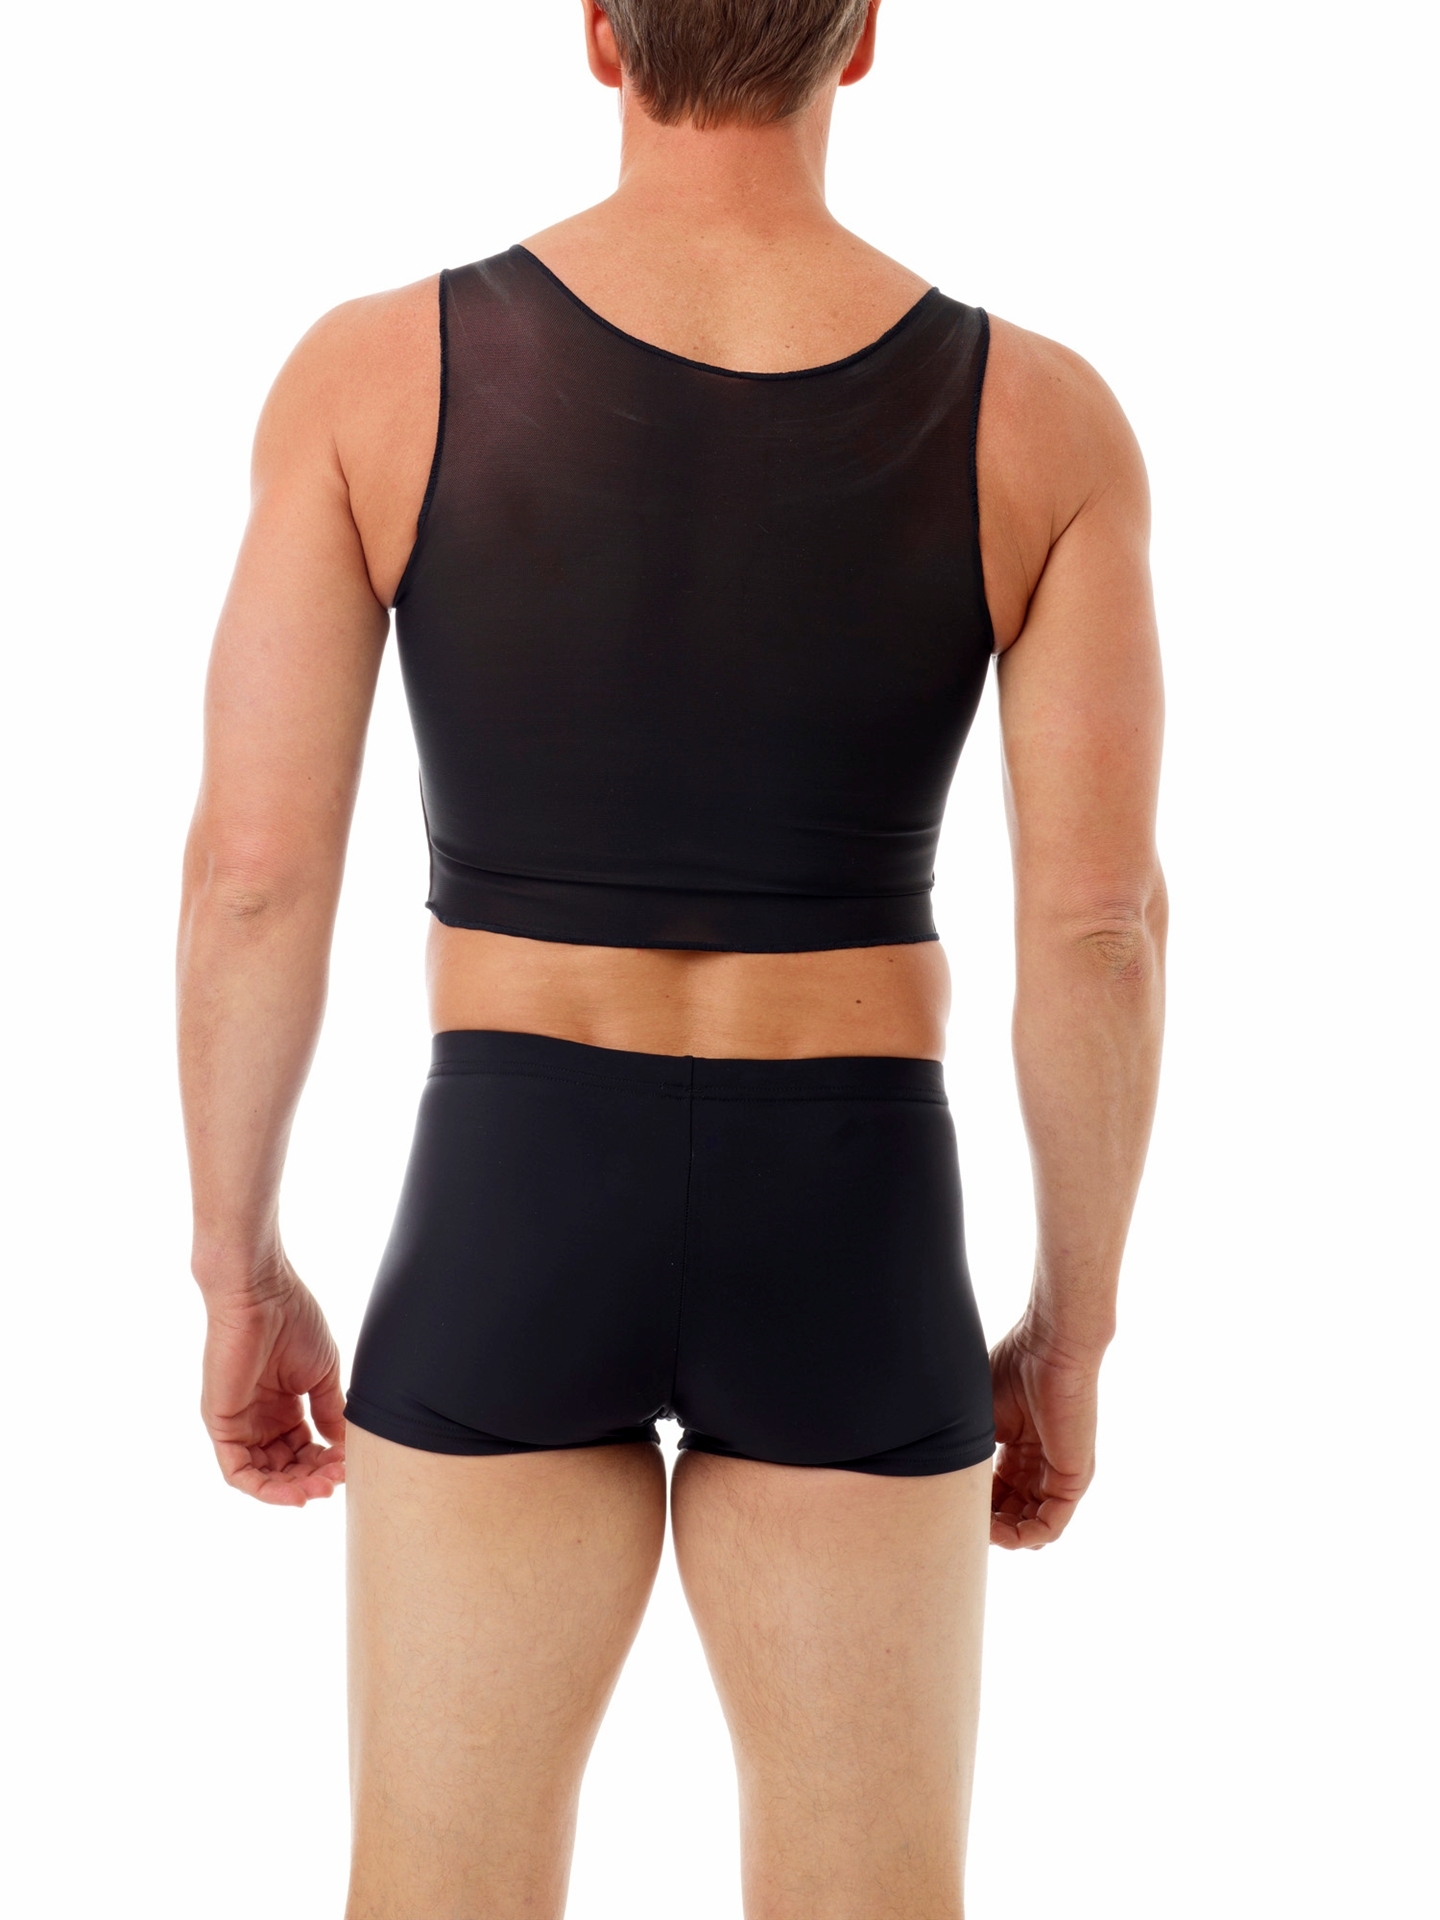 MagiCotton Extreme Chest Binder Tank. FTM Chest Binders for Trans